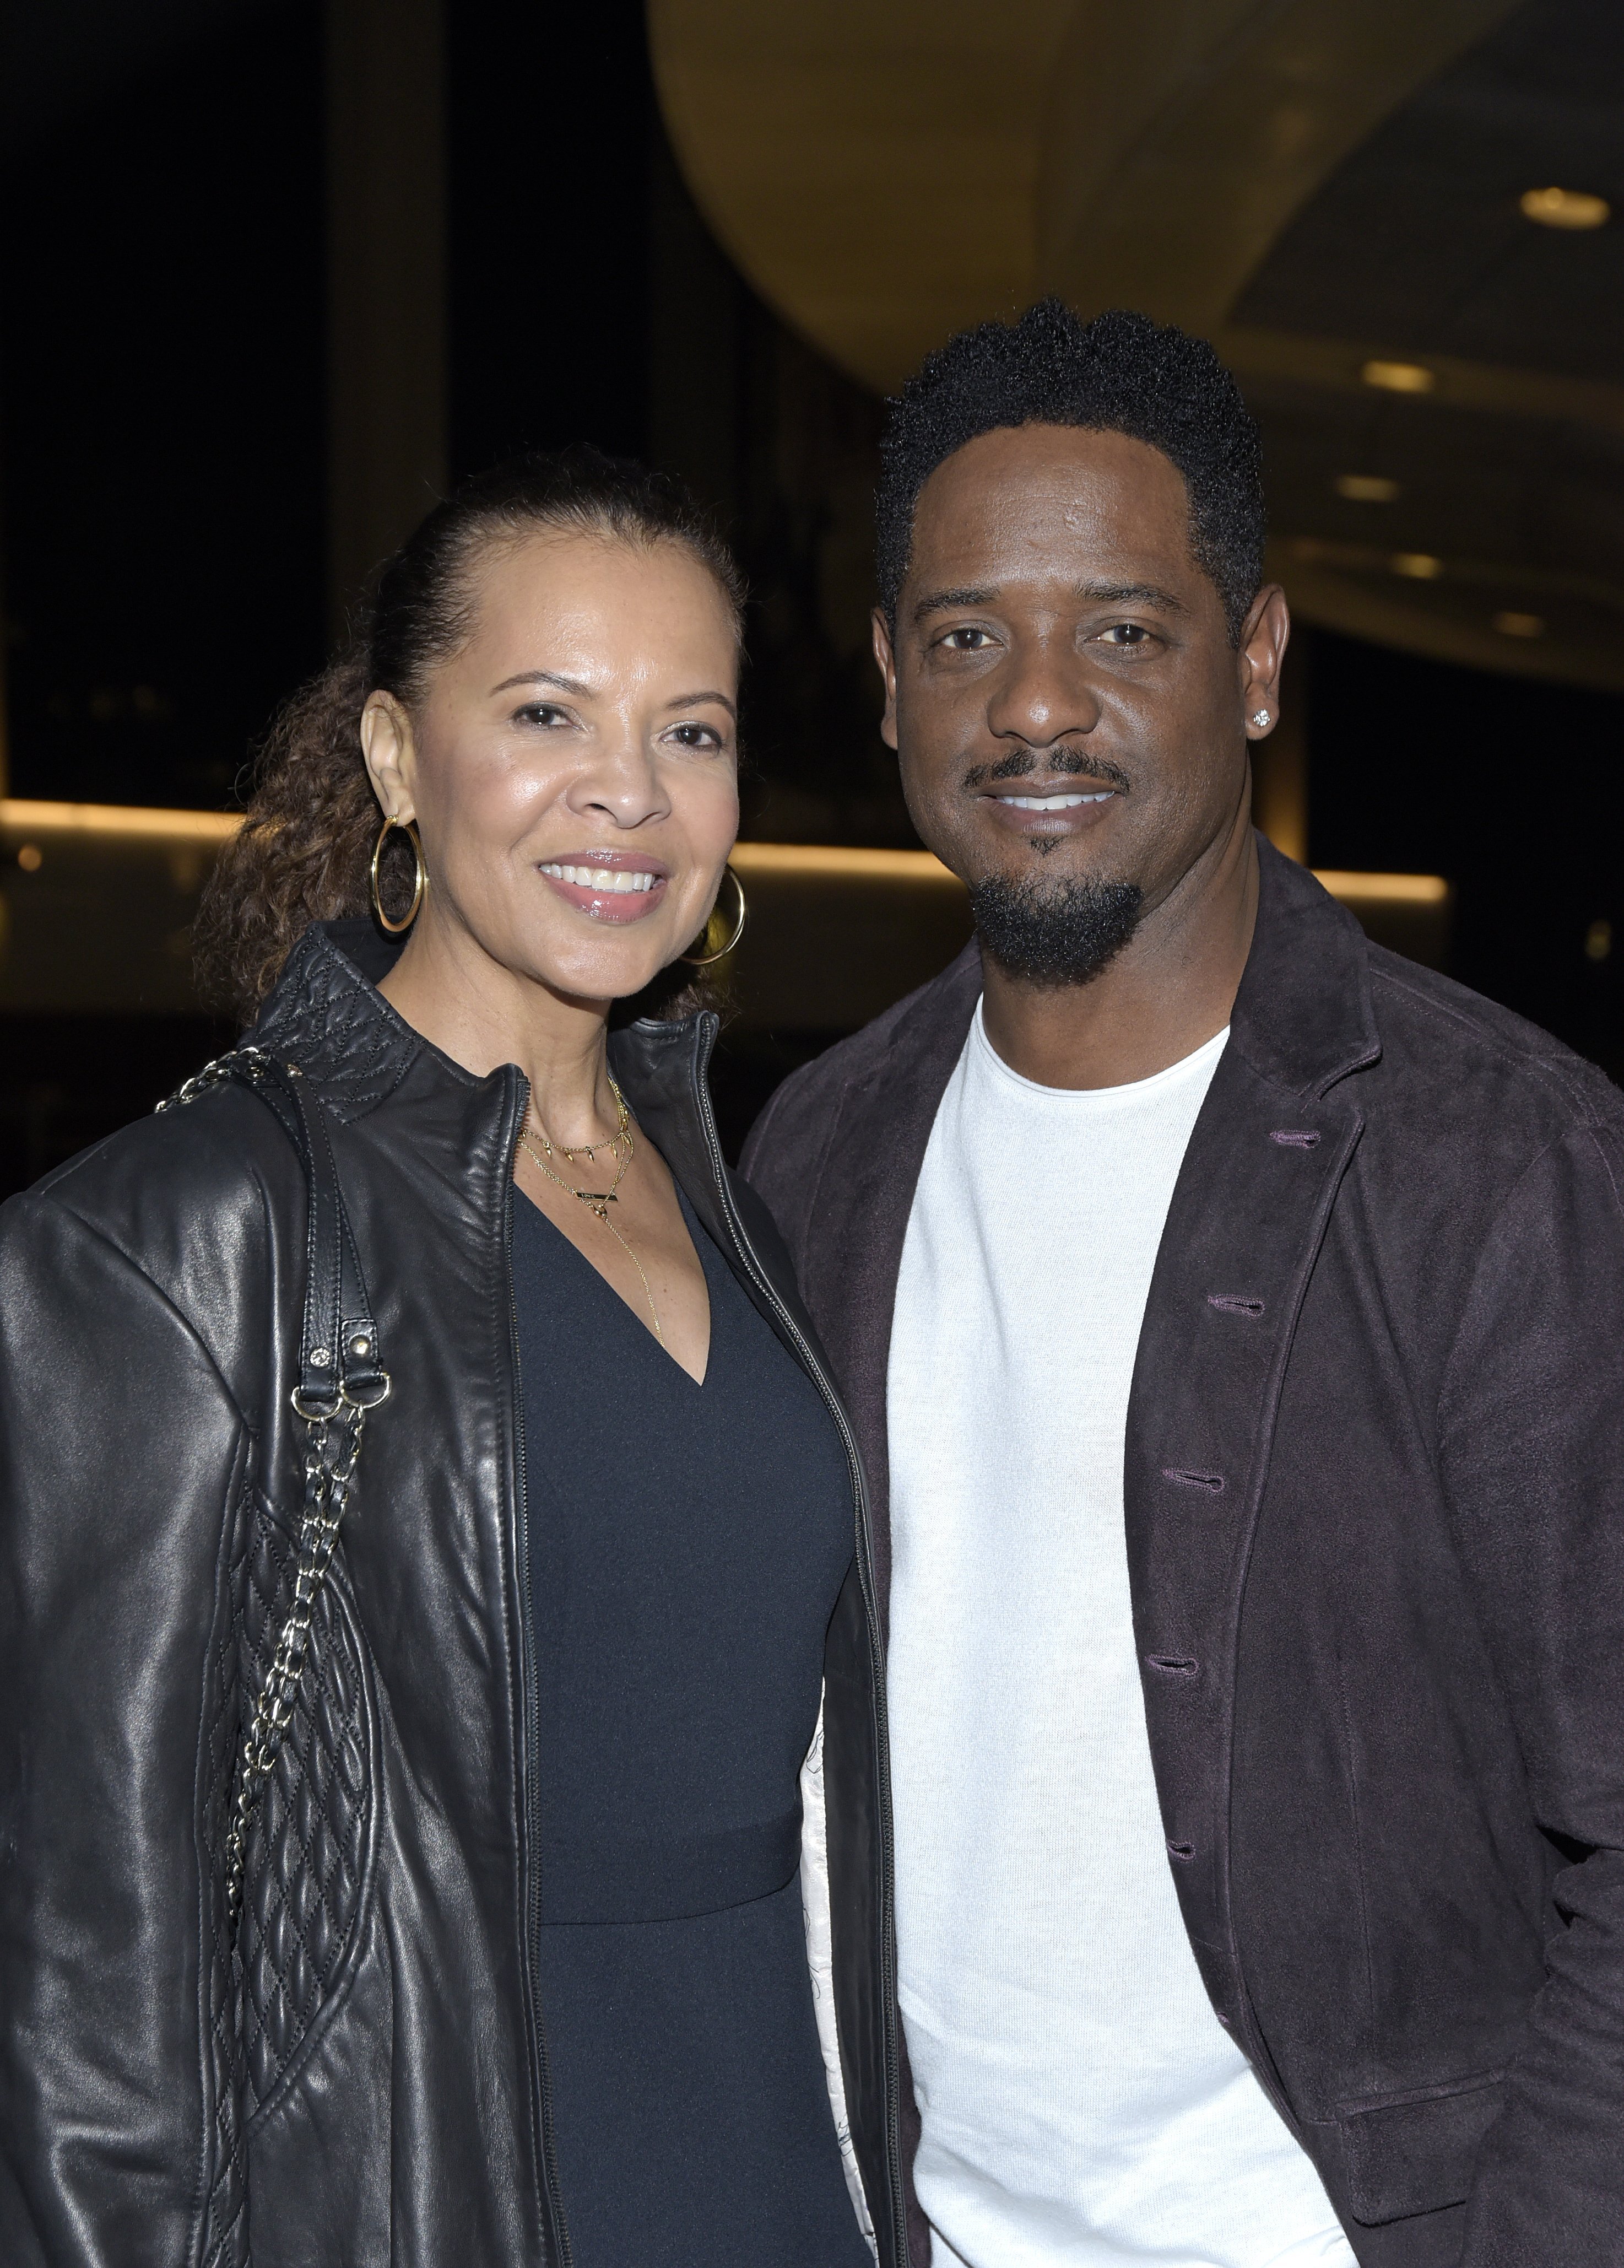 Desiree DaCosta & Blair Underwood at the opening night of "Lackawanna Blues" on Mar. 13, 2019 in California | Photo: Getty Images